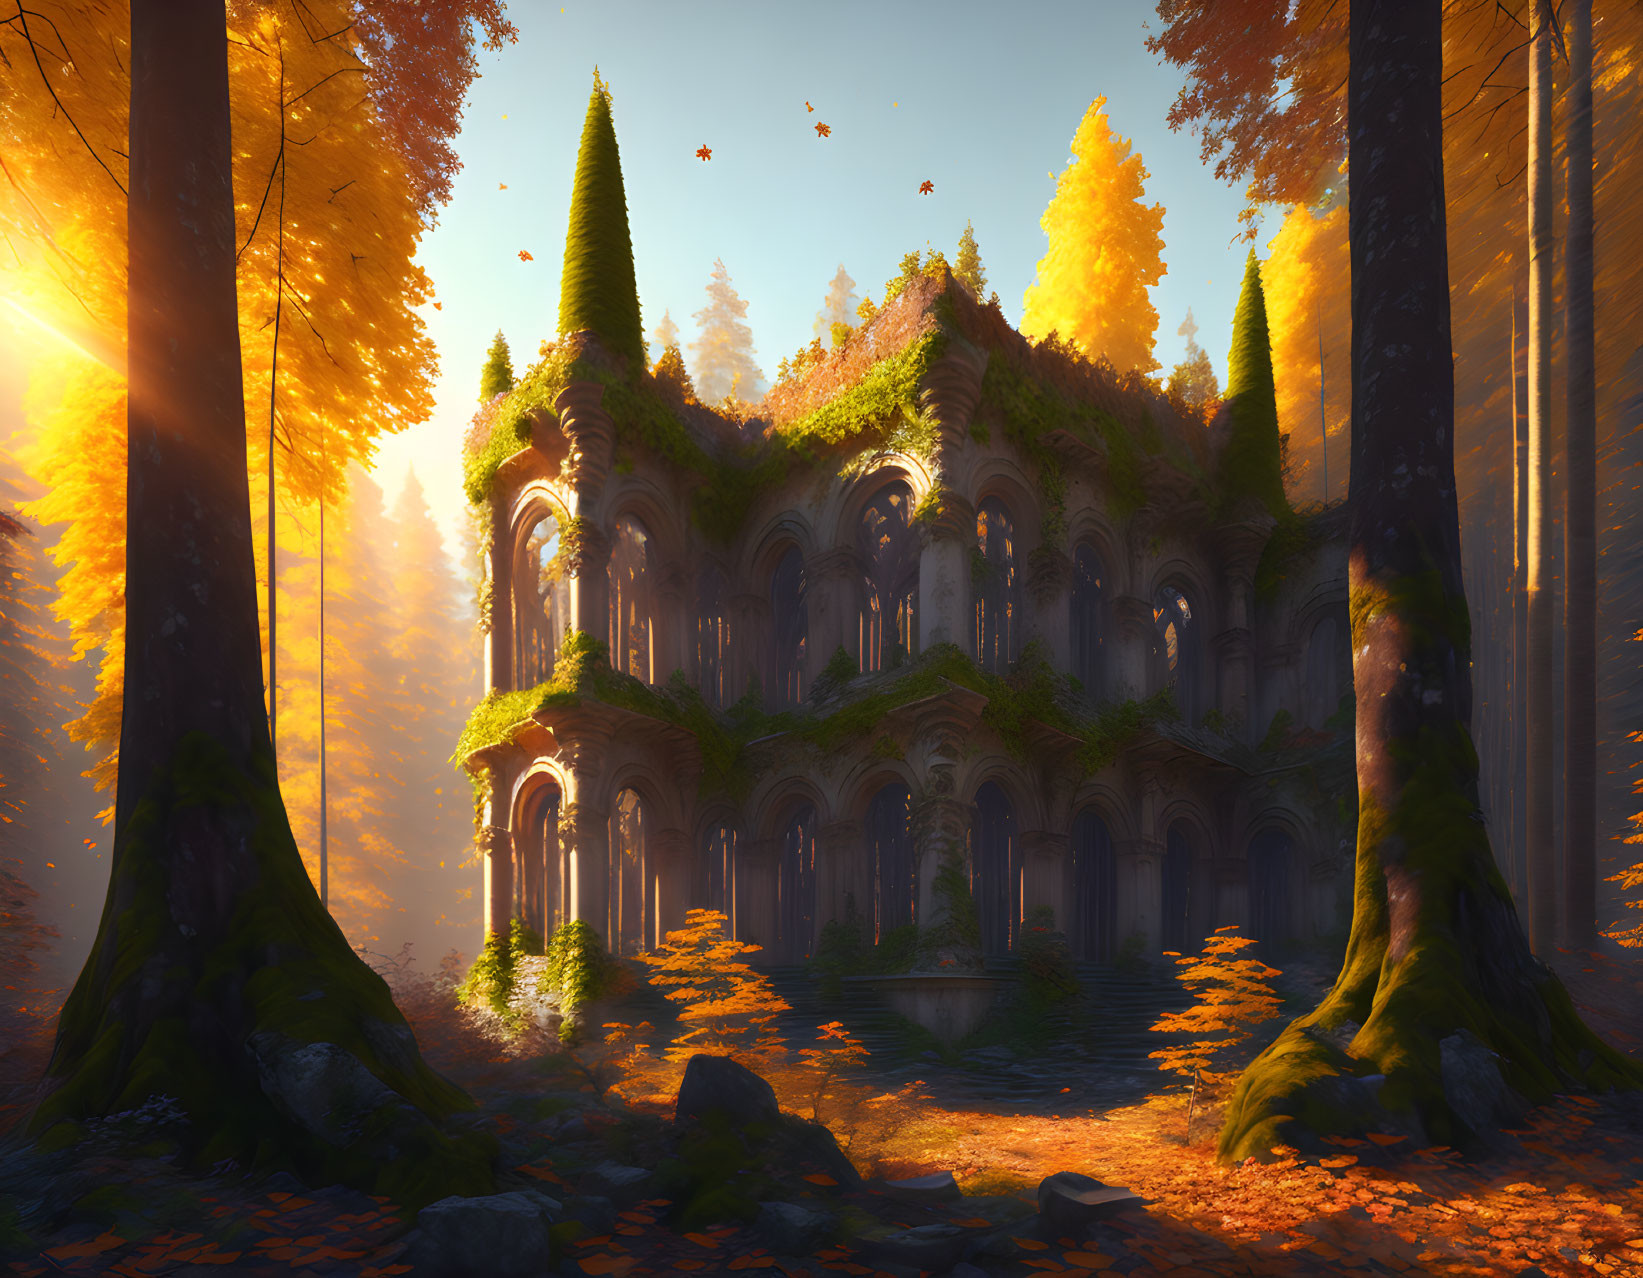 Enchanted forest scene with gothic structure and autumn leaves